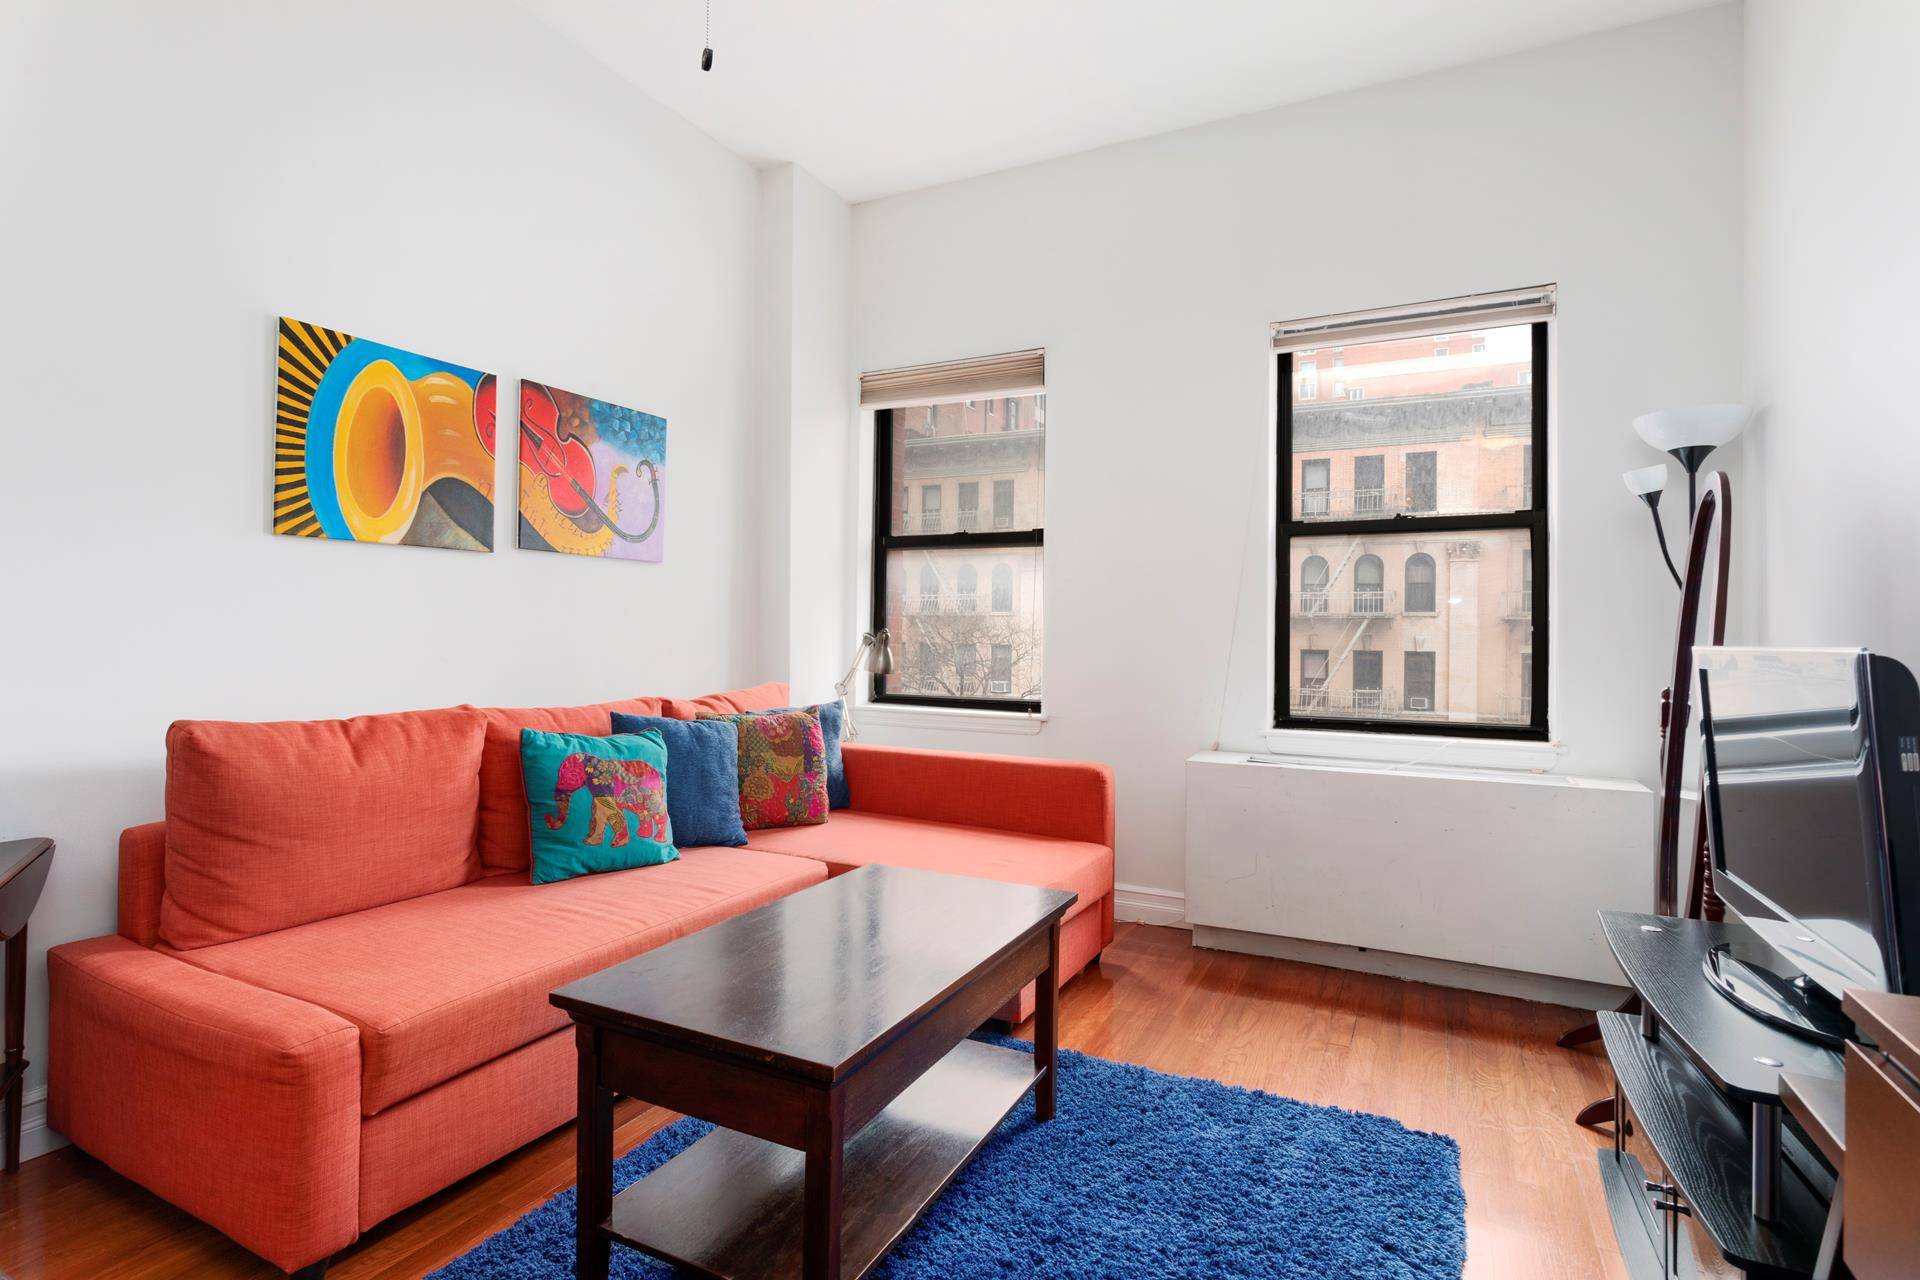 A charming studio in the heart of the Upper West Side now available.